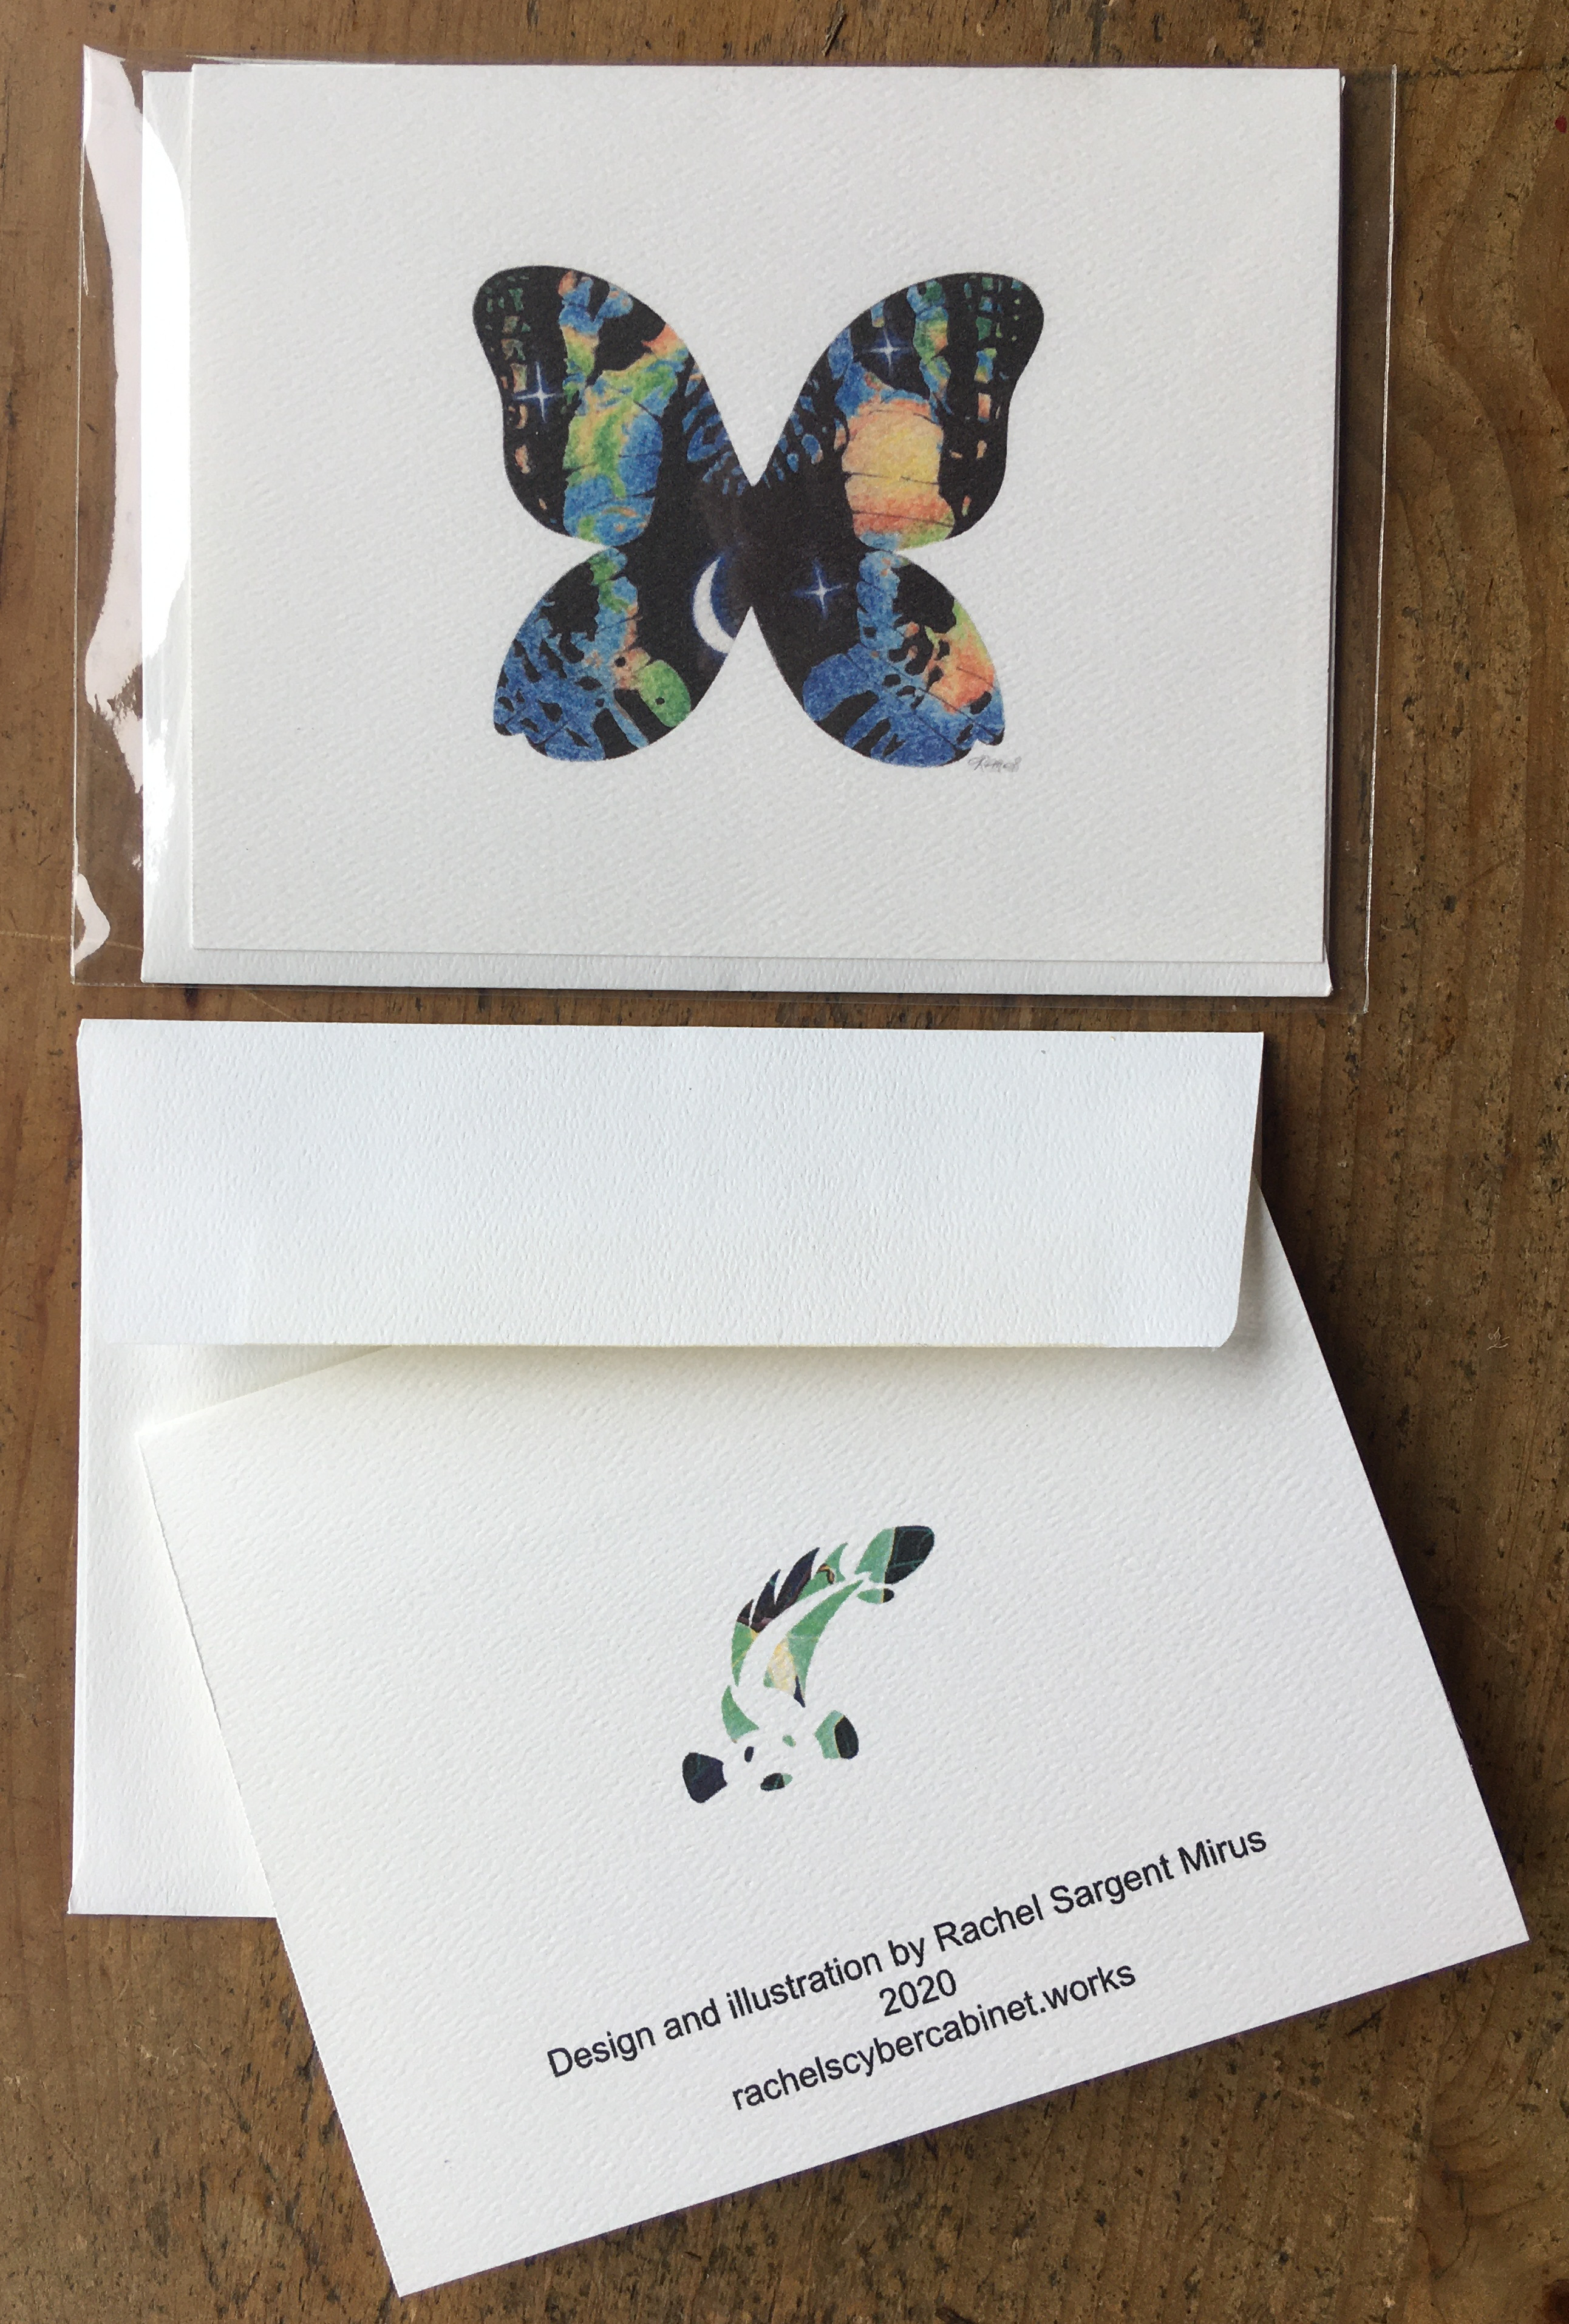 Picture of a card showing an imaginative butterfly